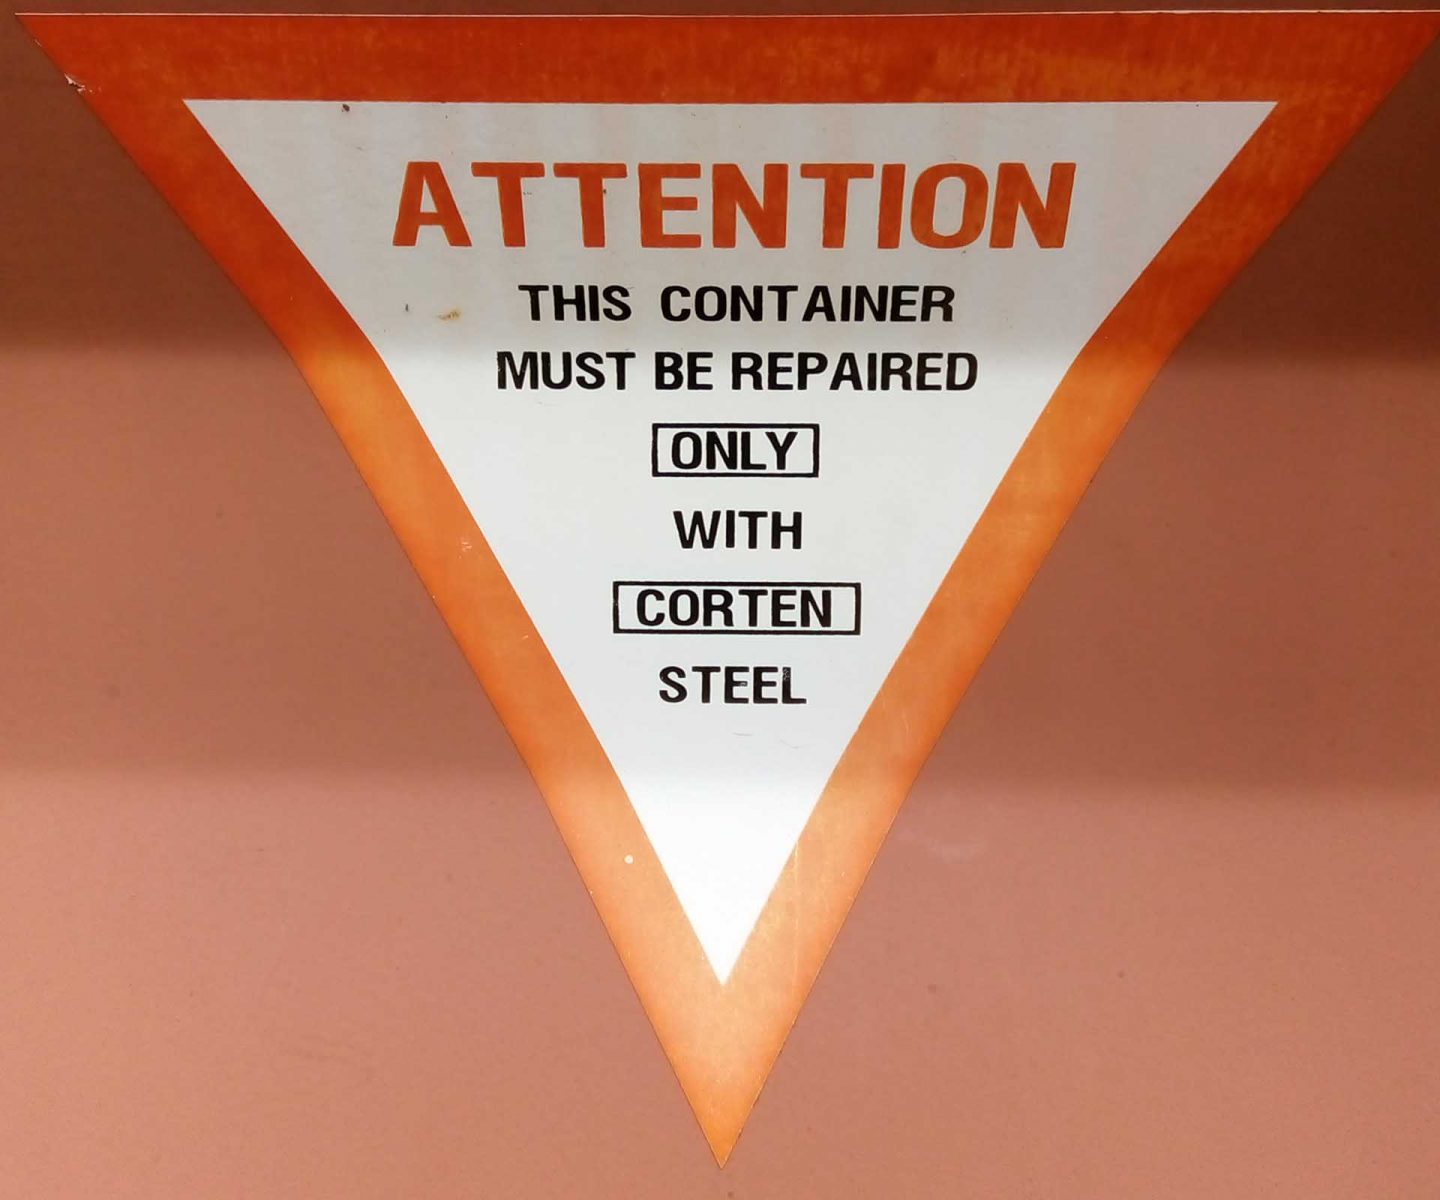 warning label to say that only corten steel container panels should be used to repair this container